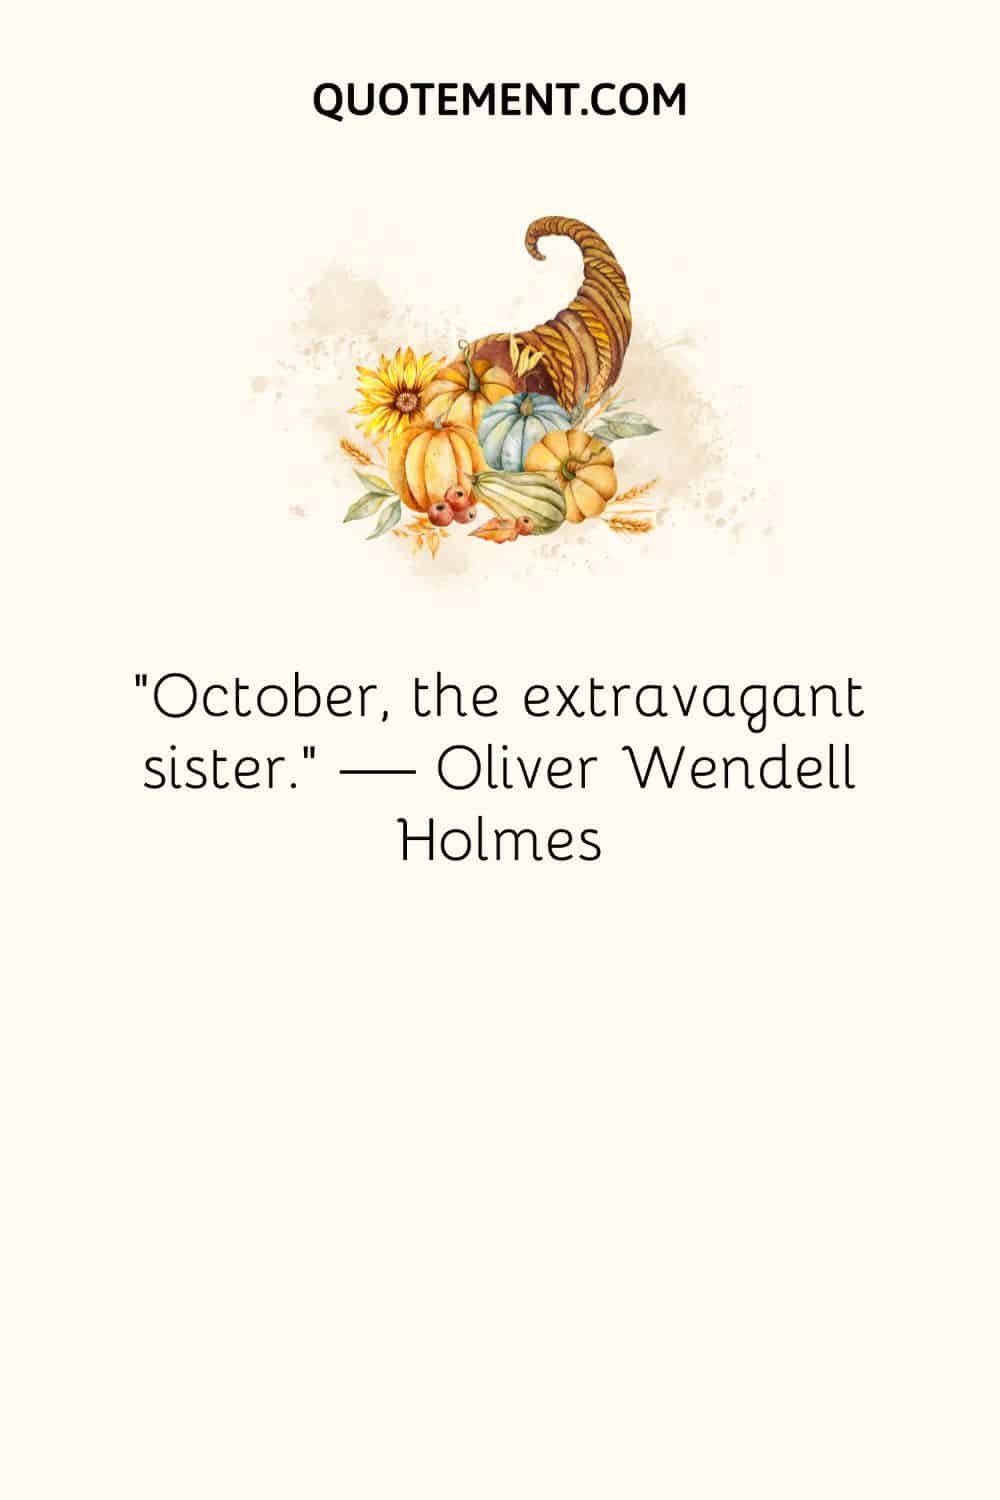 October, the extravagant sister